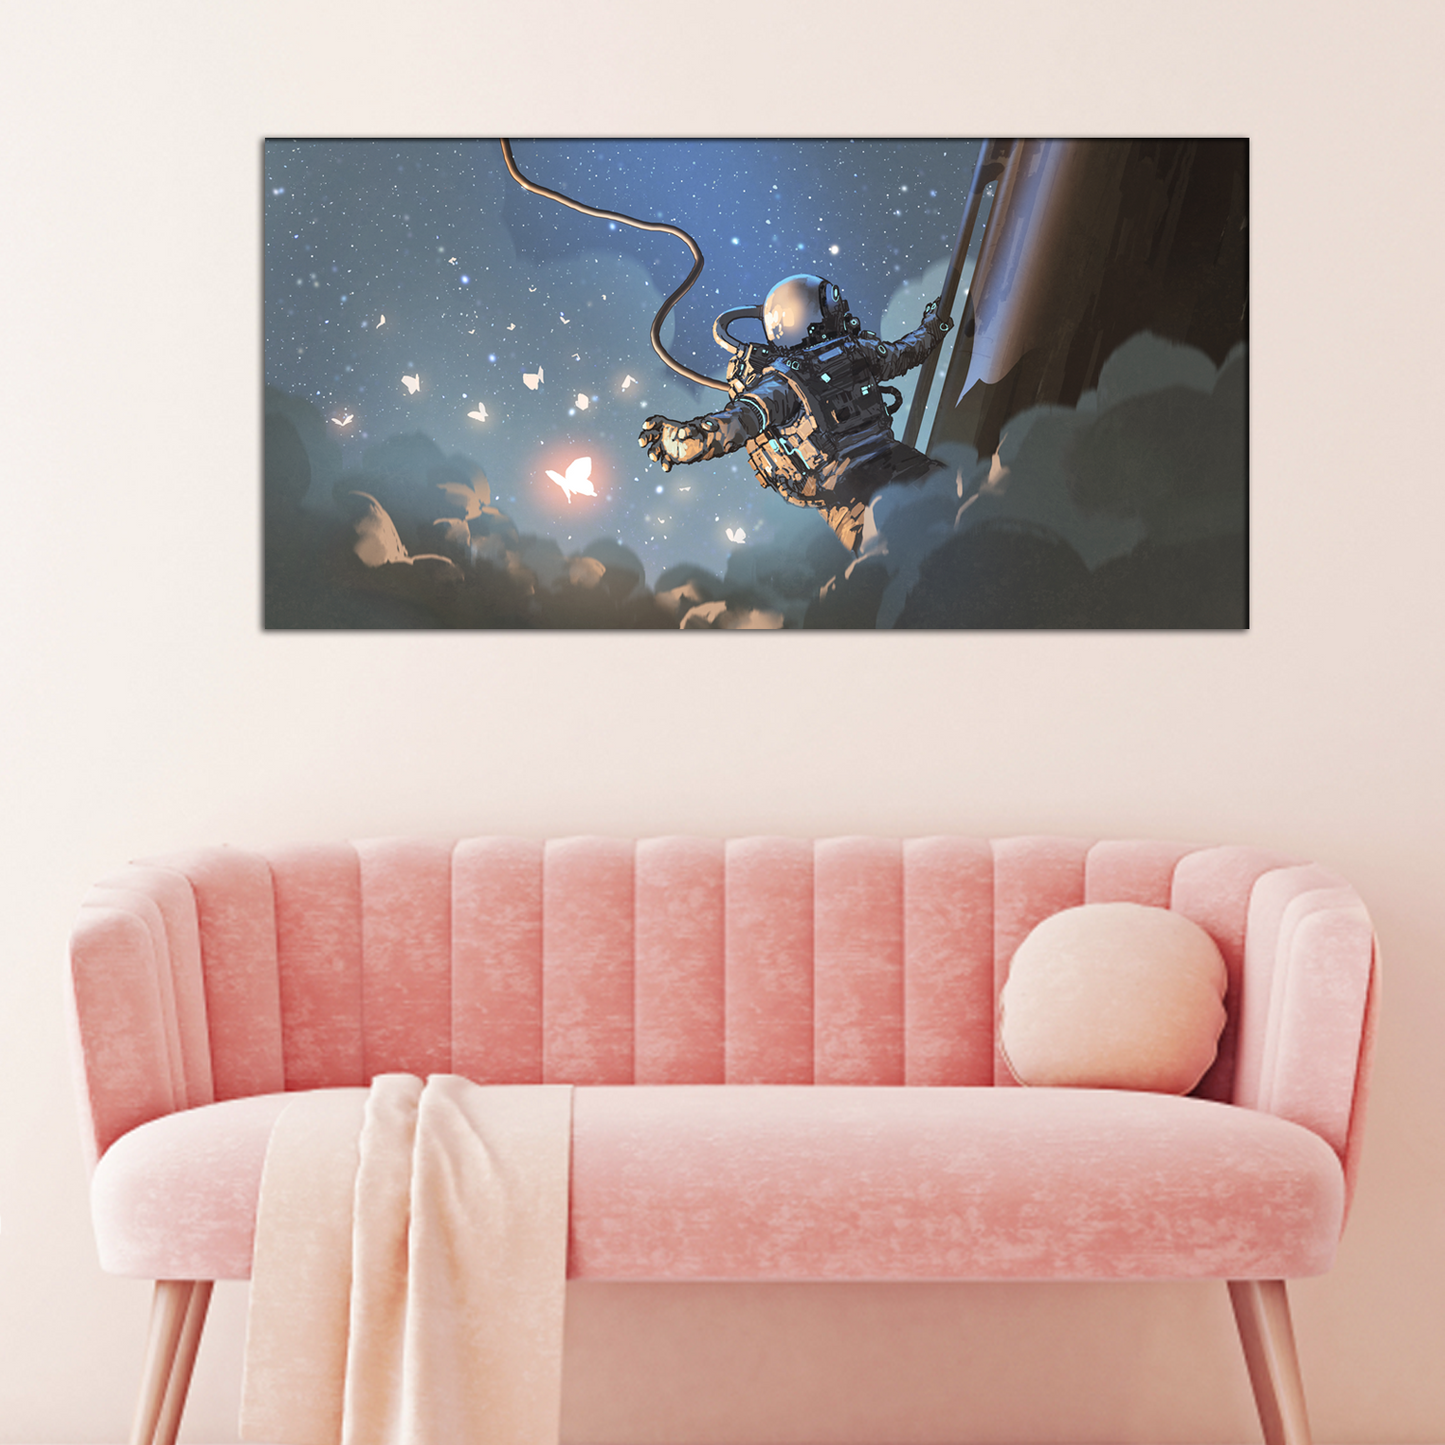 The Astronaut Catch The Butterfly Canvas Print Wall Painting